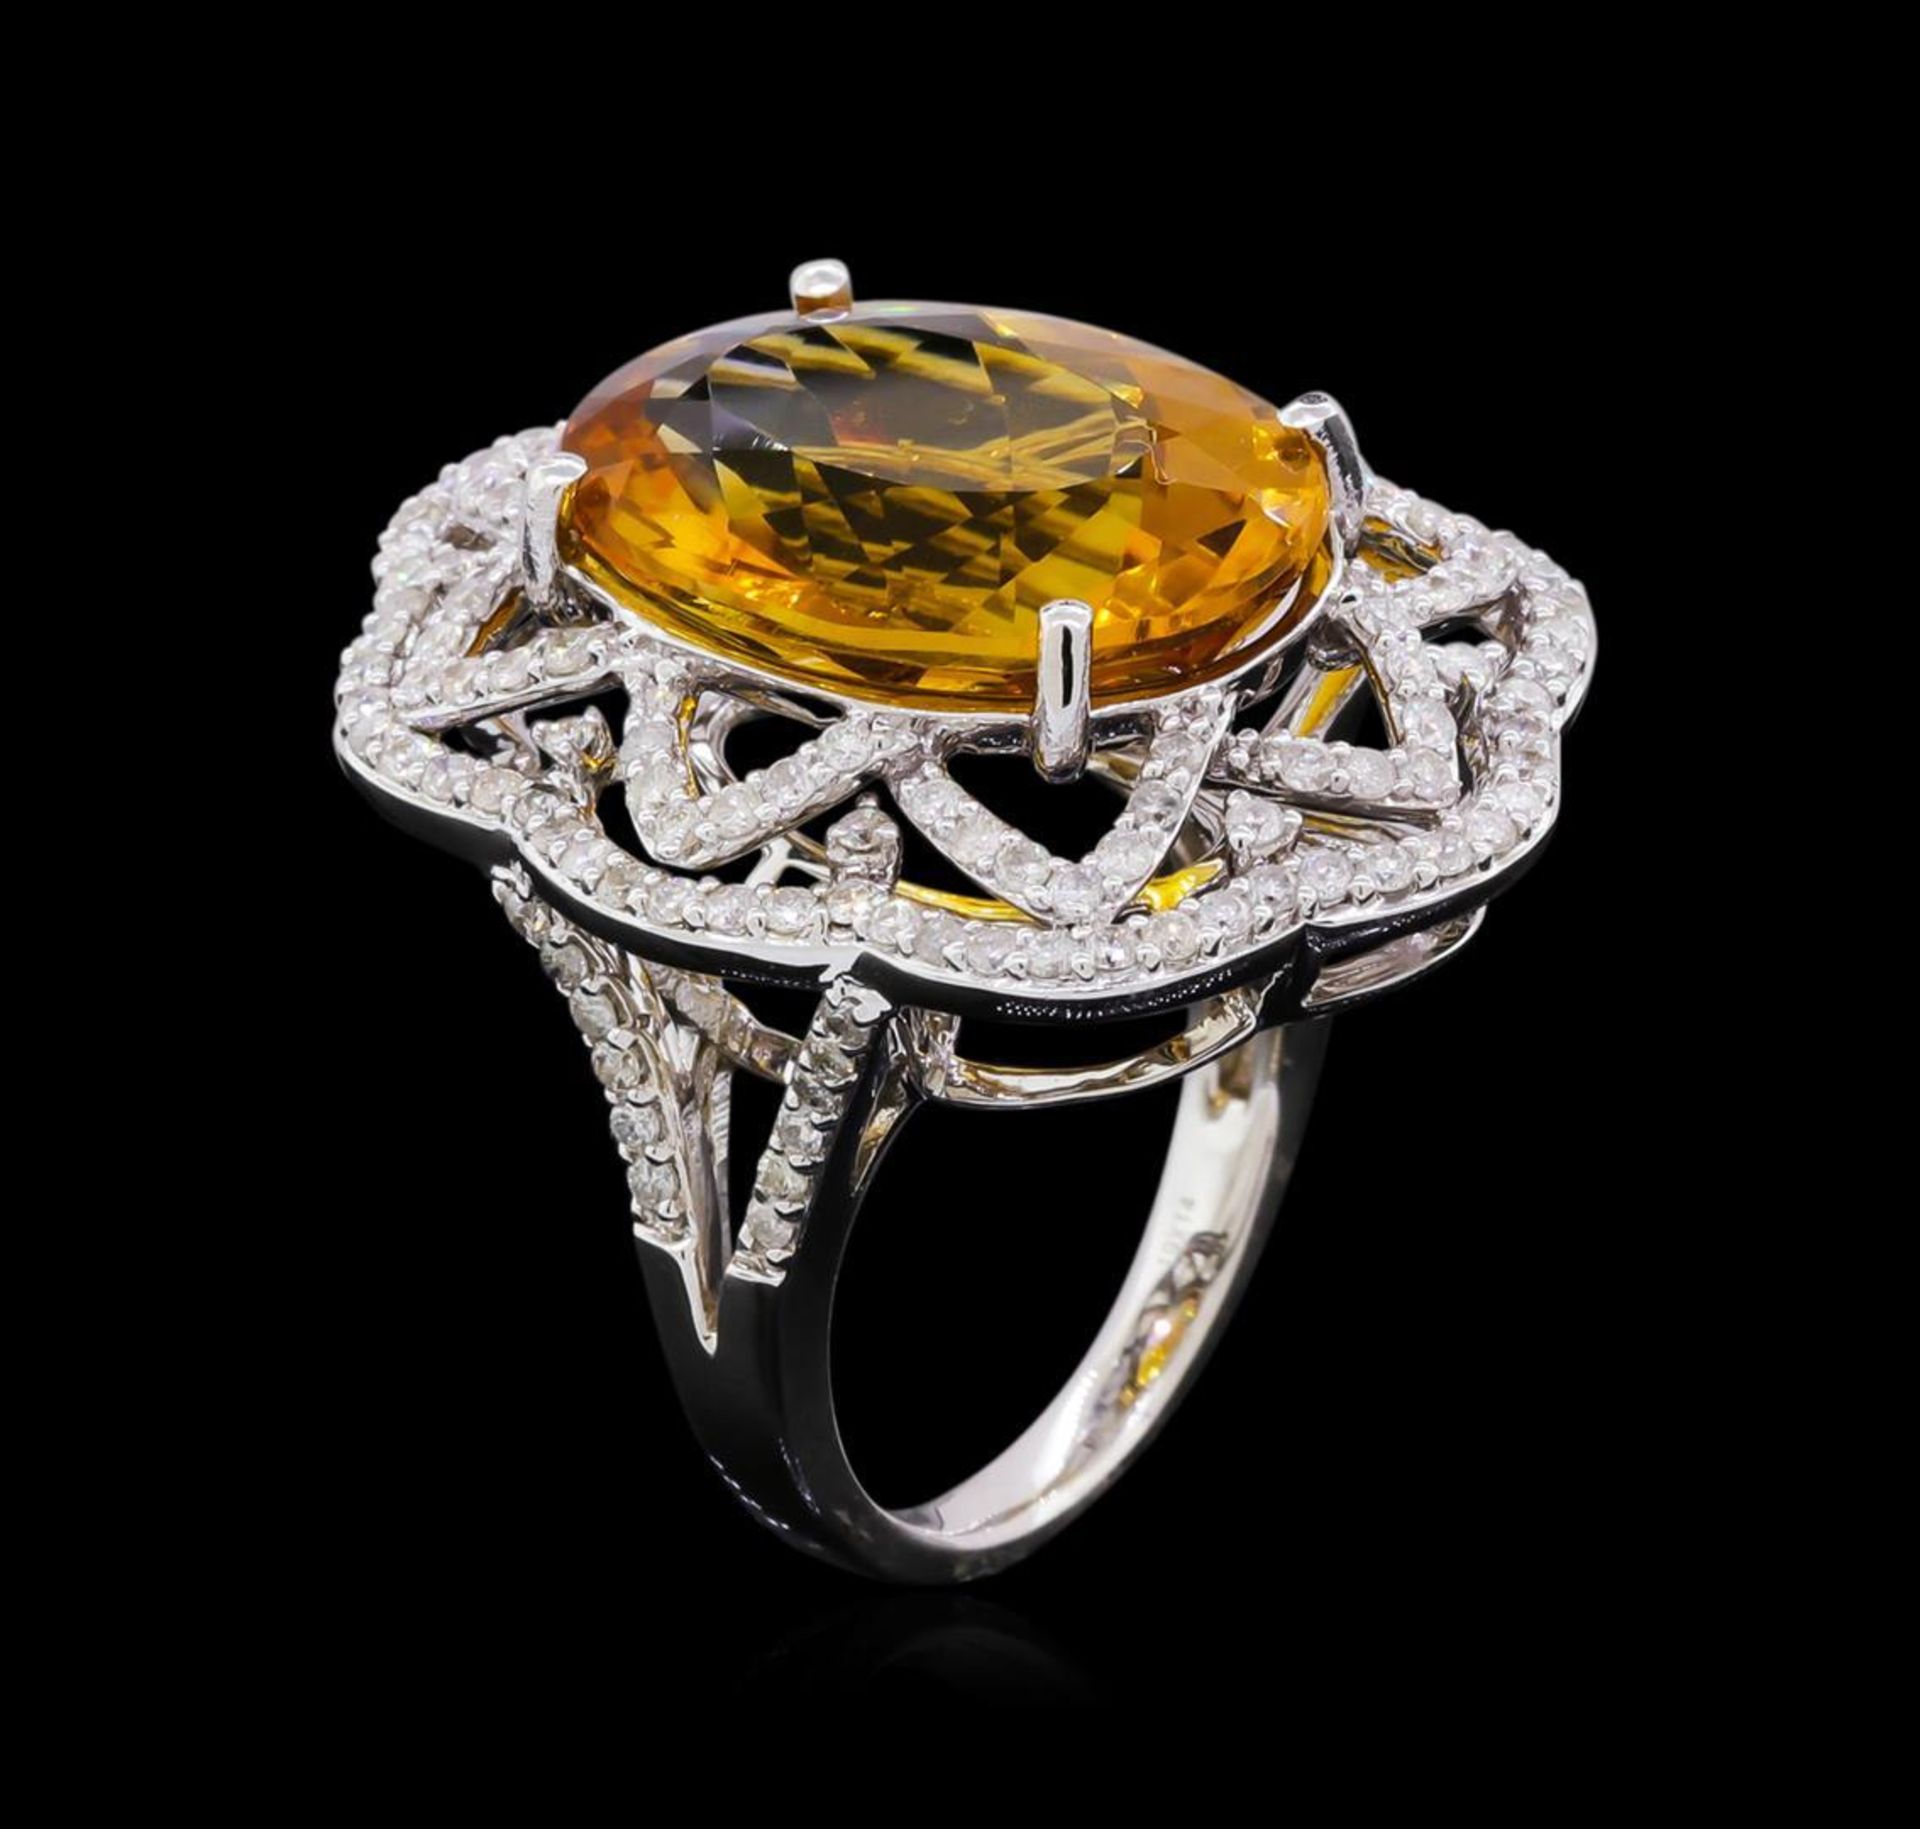 14KT White Gold 10.91 ctw Citrine and Diamond Ring - Image 4 of 5